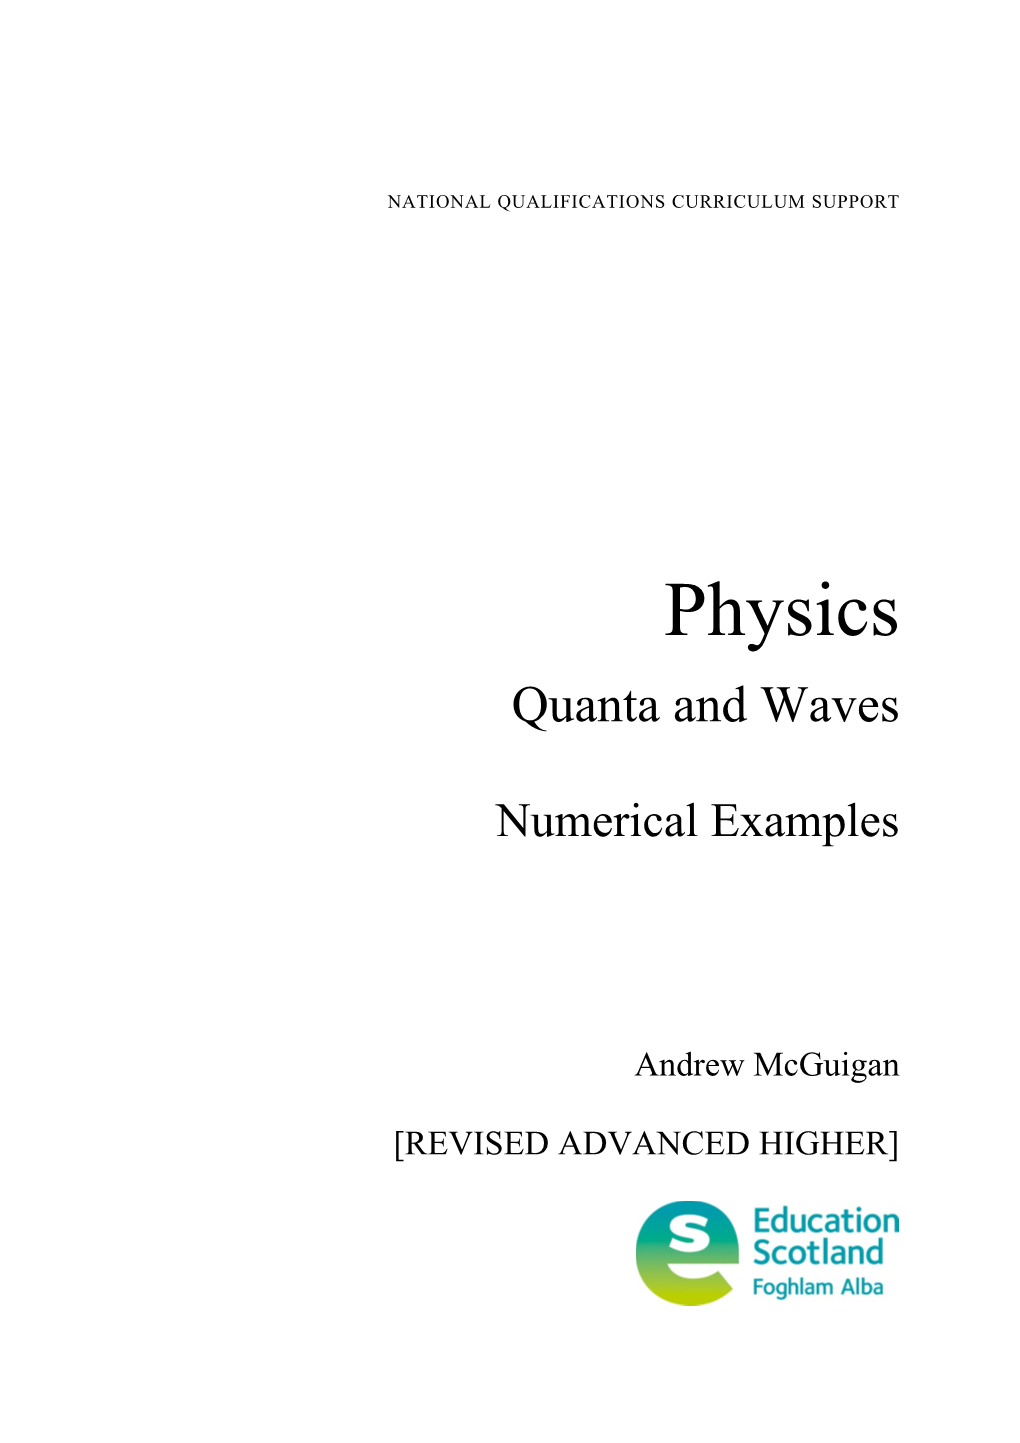 Physics - Quanta and Waves: Numerical Examples